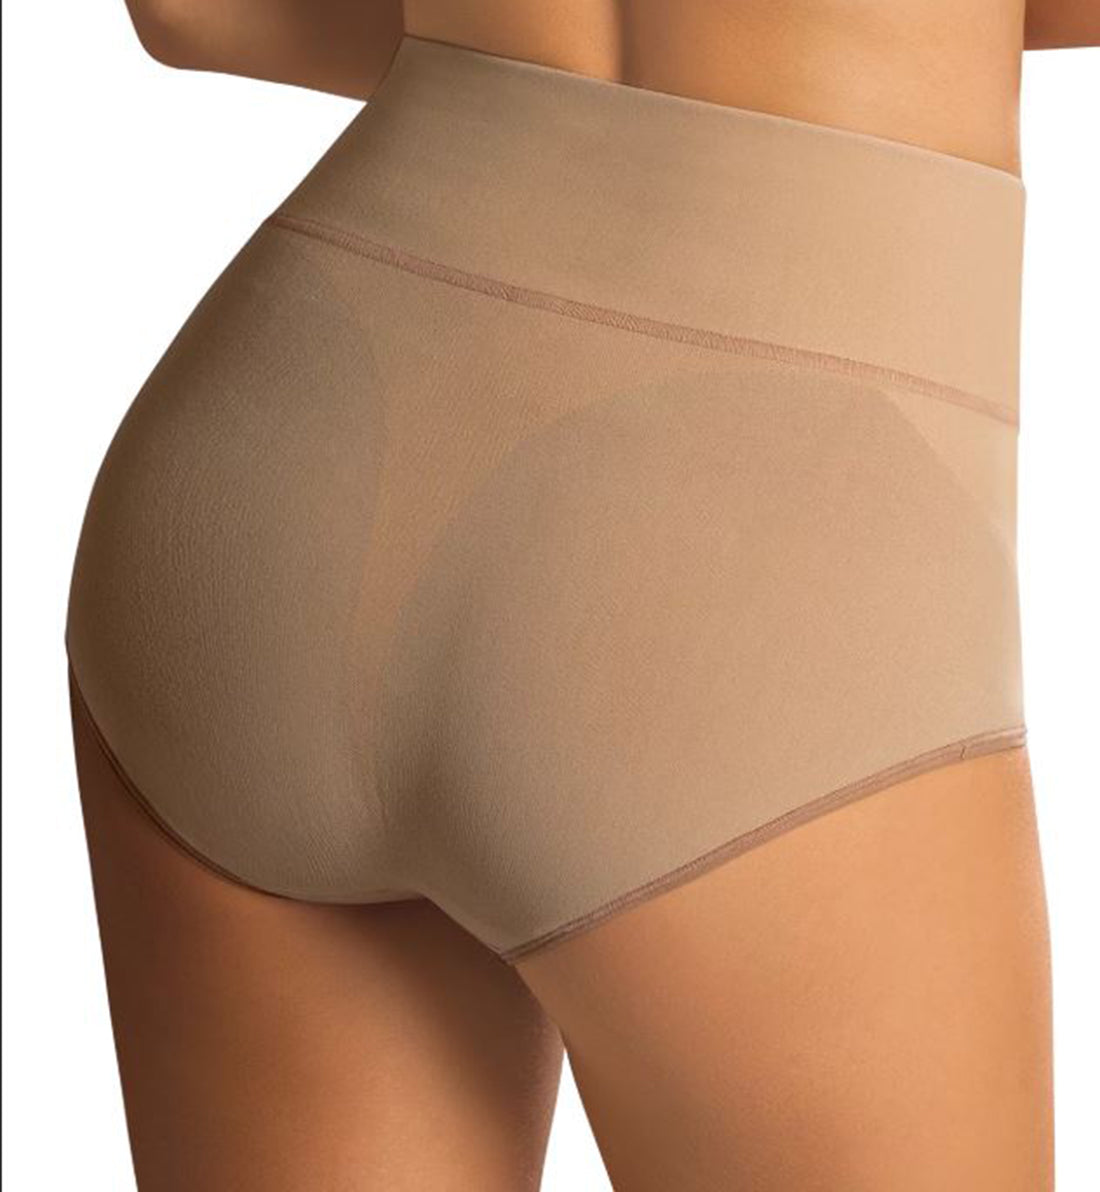 Leonisa High-Waisted Classic Control Panty (012841),Small,Soft Natural - Soft Natural,Small